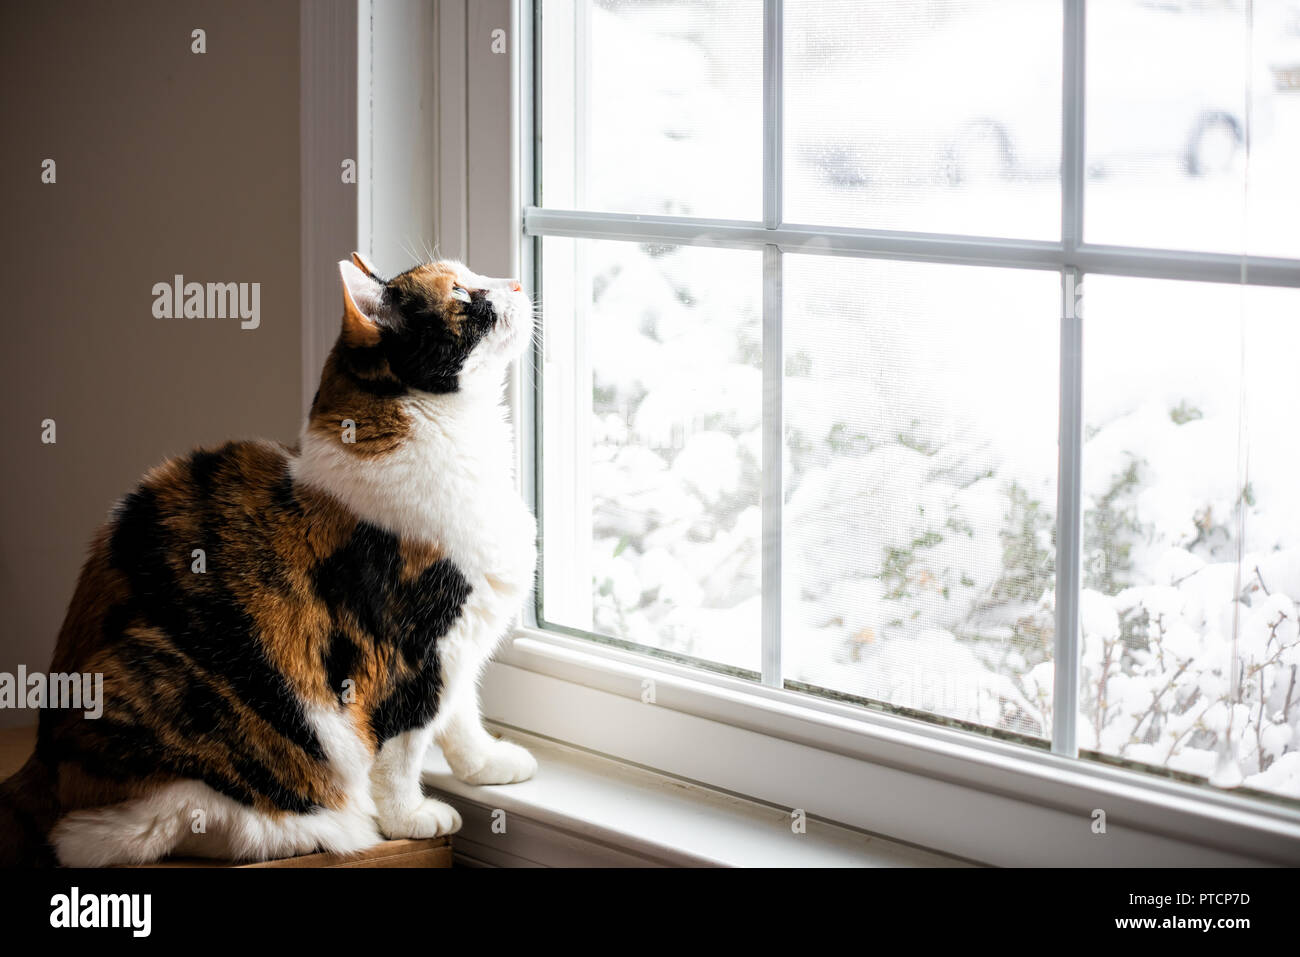 Female, cute calico cat on windowsill window sill looking up at birds staring through glass outside with winter snow Stock Photo